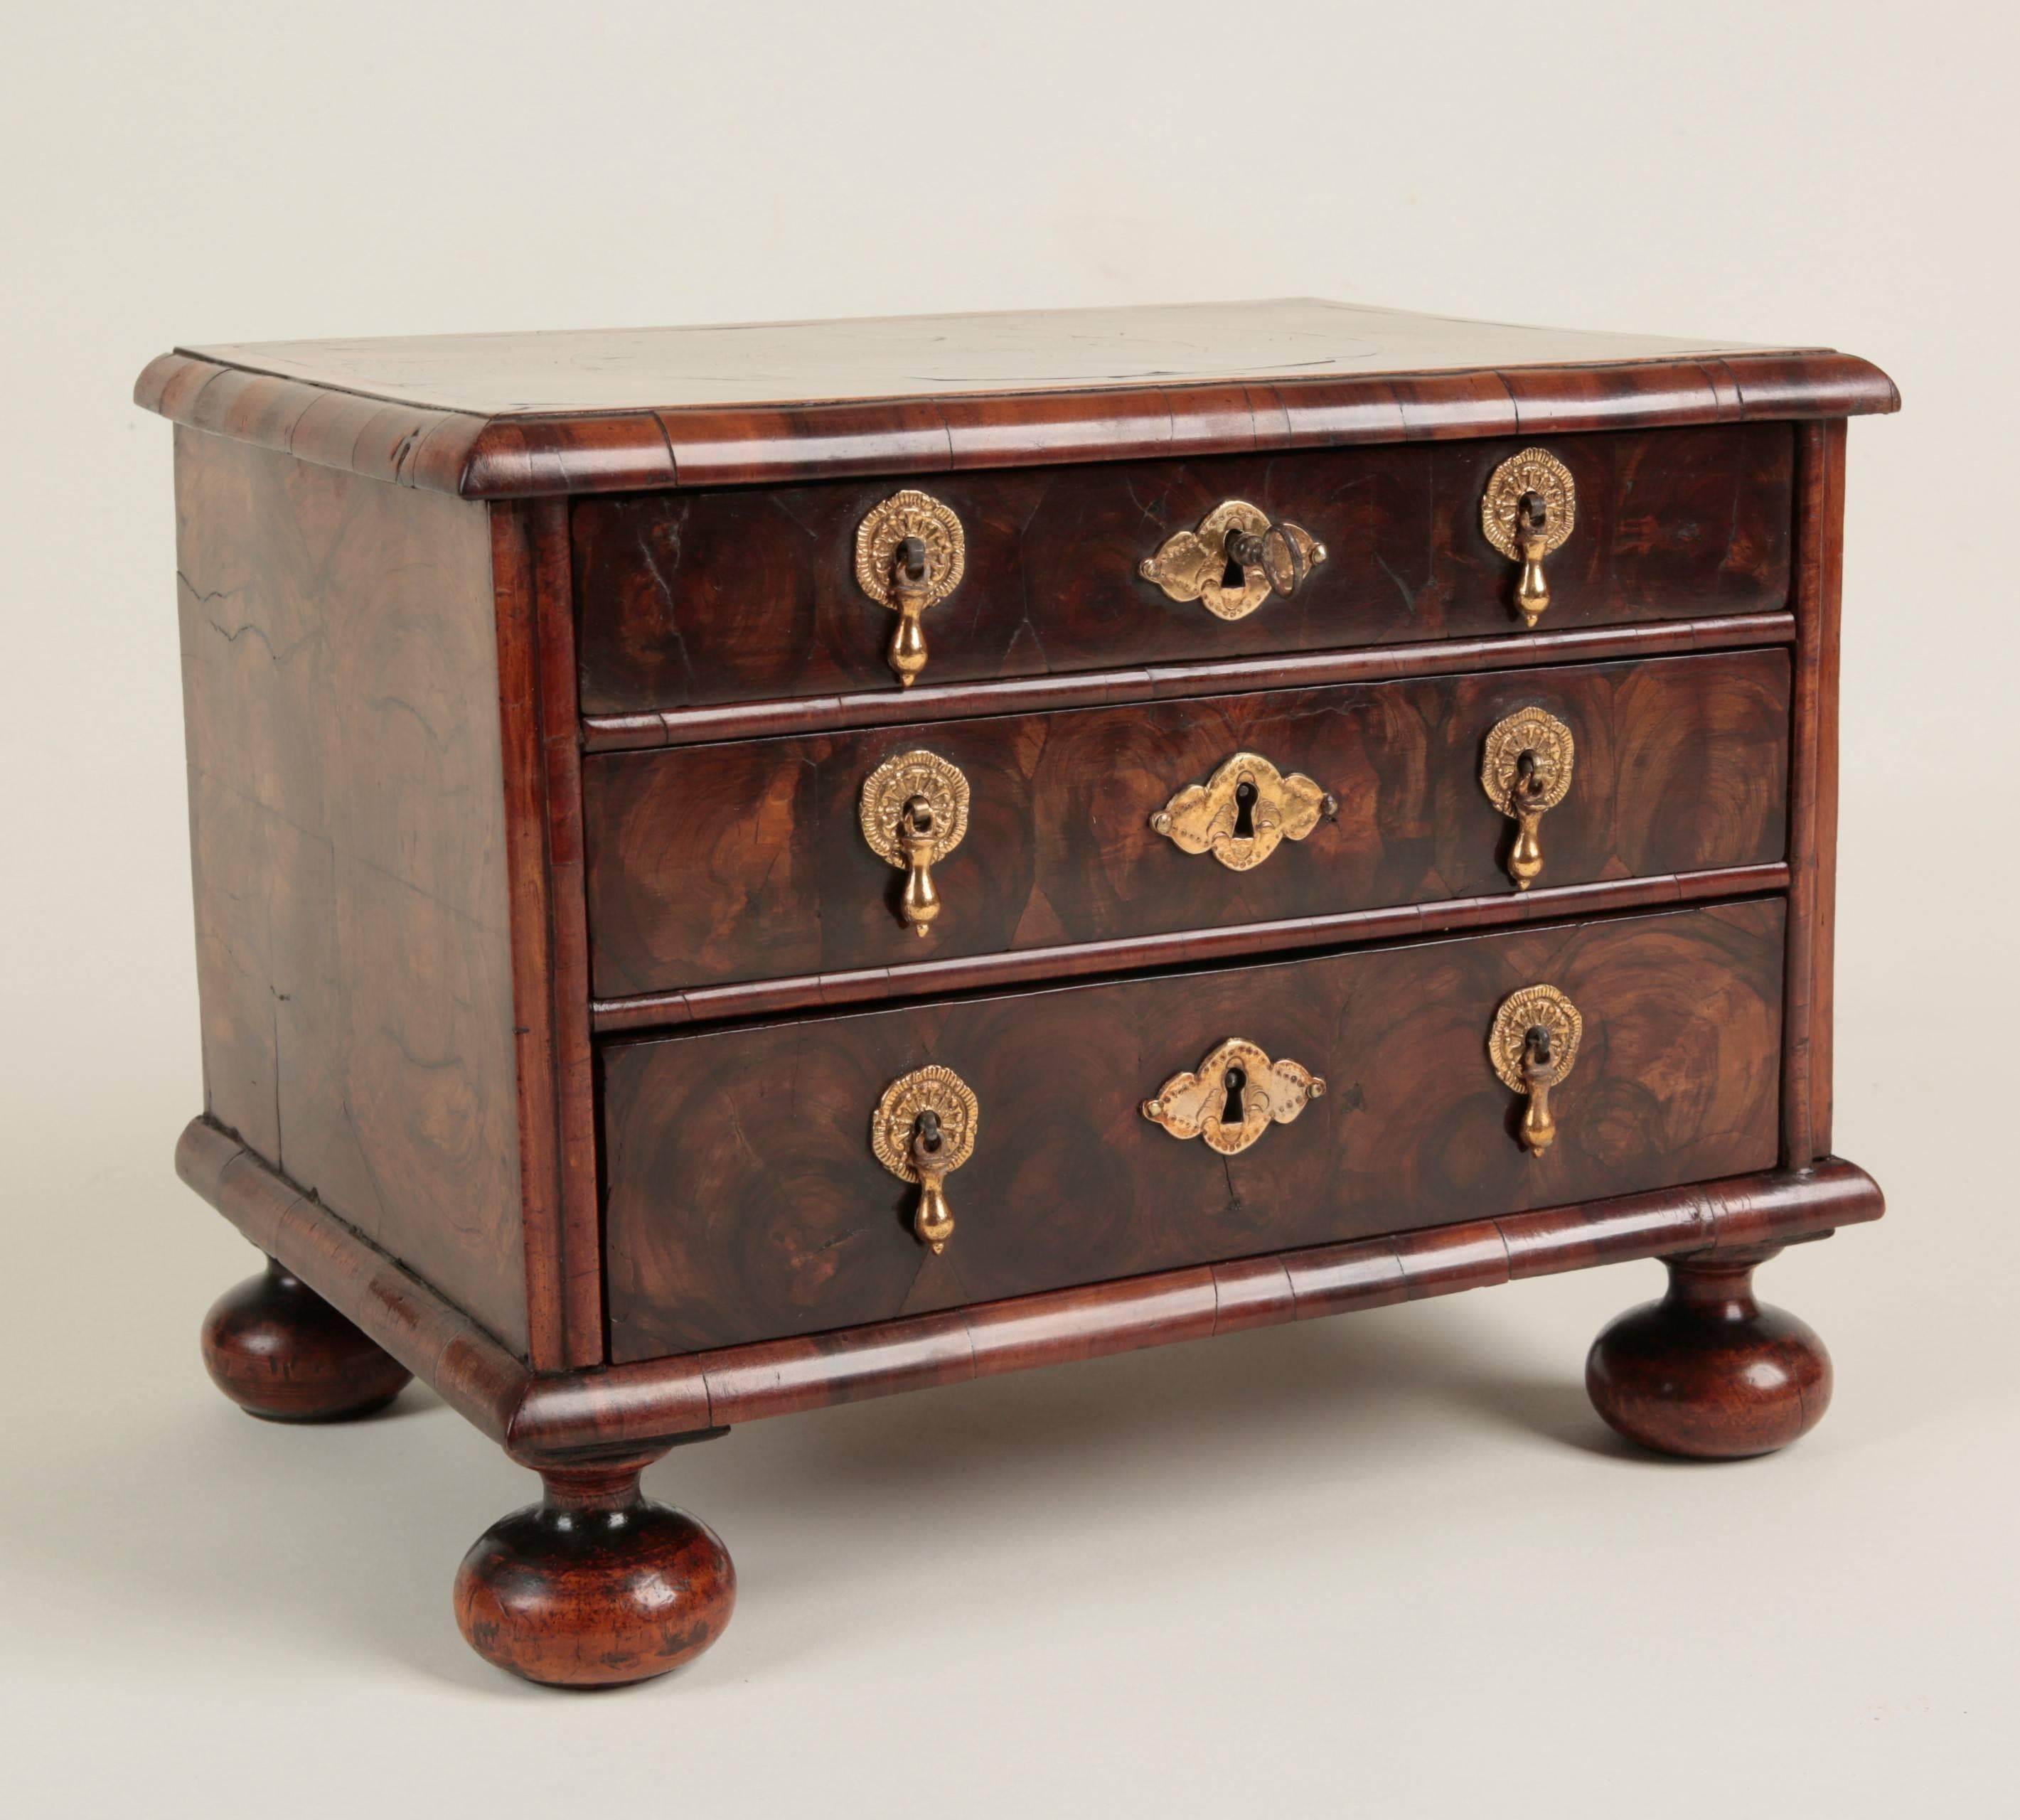 An exceptionally rare William and Mary period miniature chest of applied oyster-cut olive wood. The top and the three graduated oak lined drawers cross-banded with fruitwood. Fitted with original operational locks, the handles and escutcheons